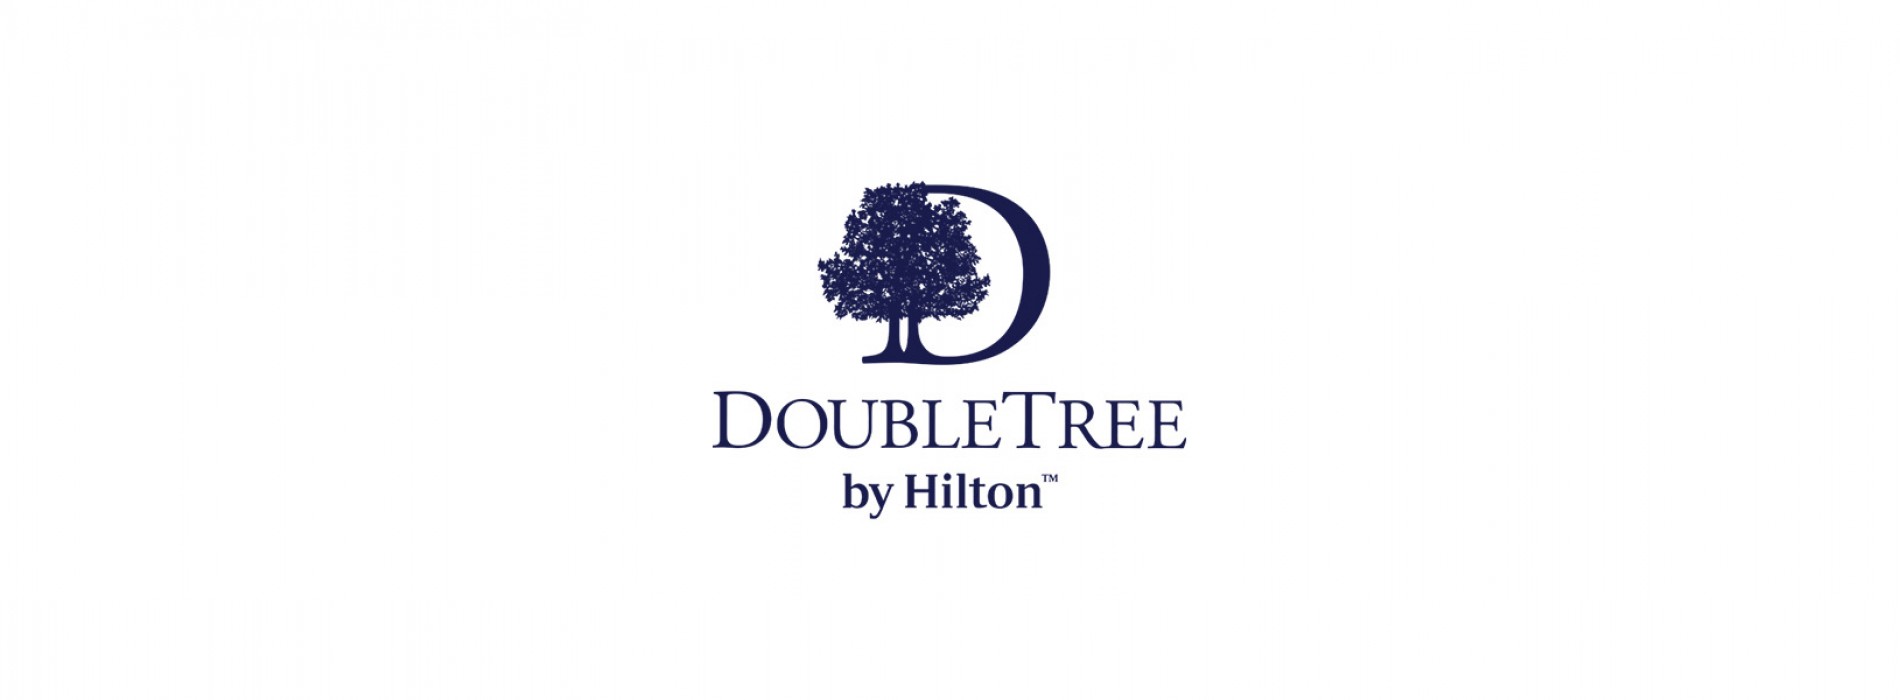 DoubleTree by Hilton Gurugram Baani Square appoints Siddharth Mann as New Commercial Director